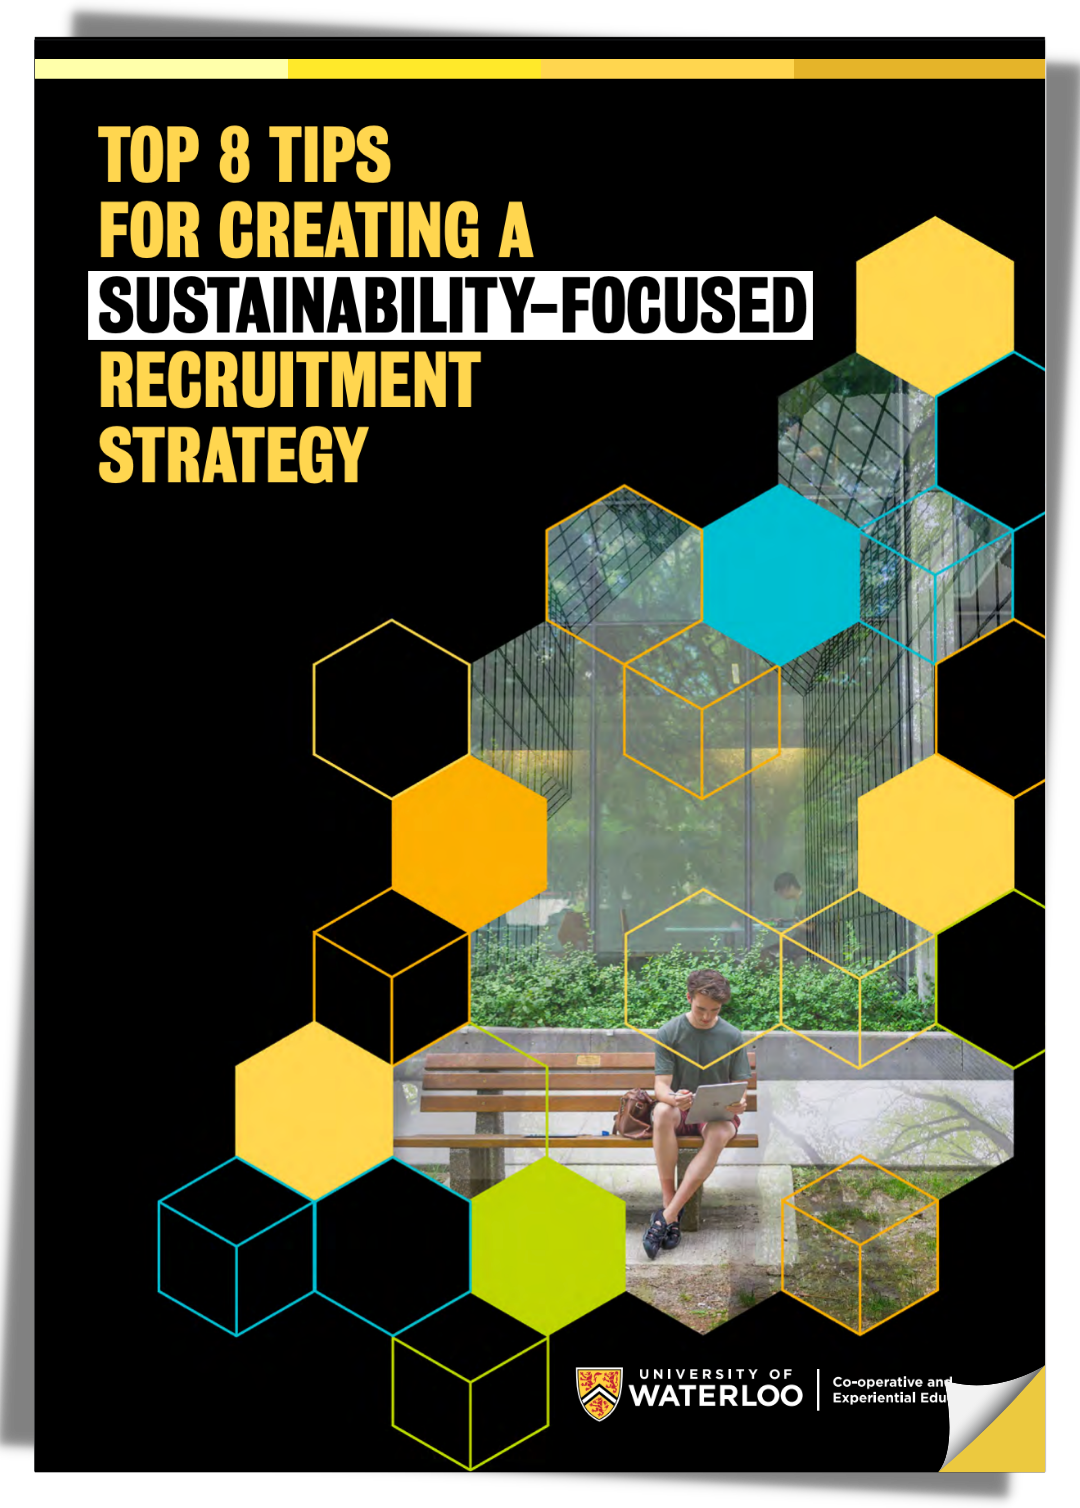 Cover of the 'Top 8 tips for creating a sustainability-focused recruitment strategy' booklet